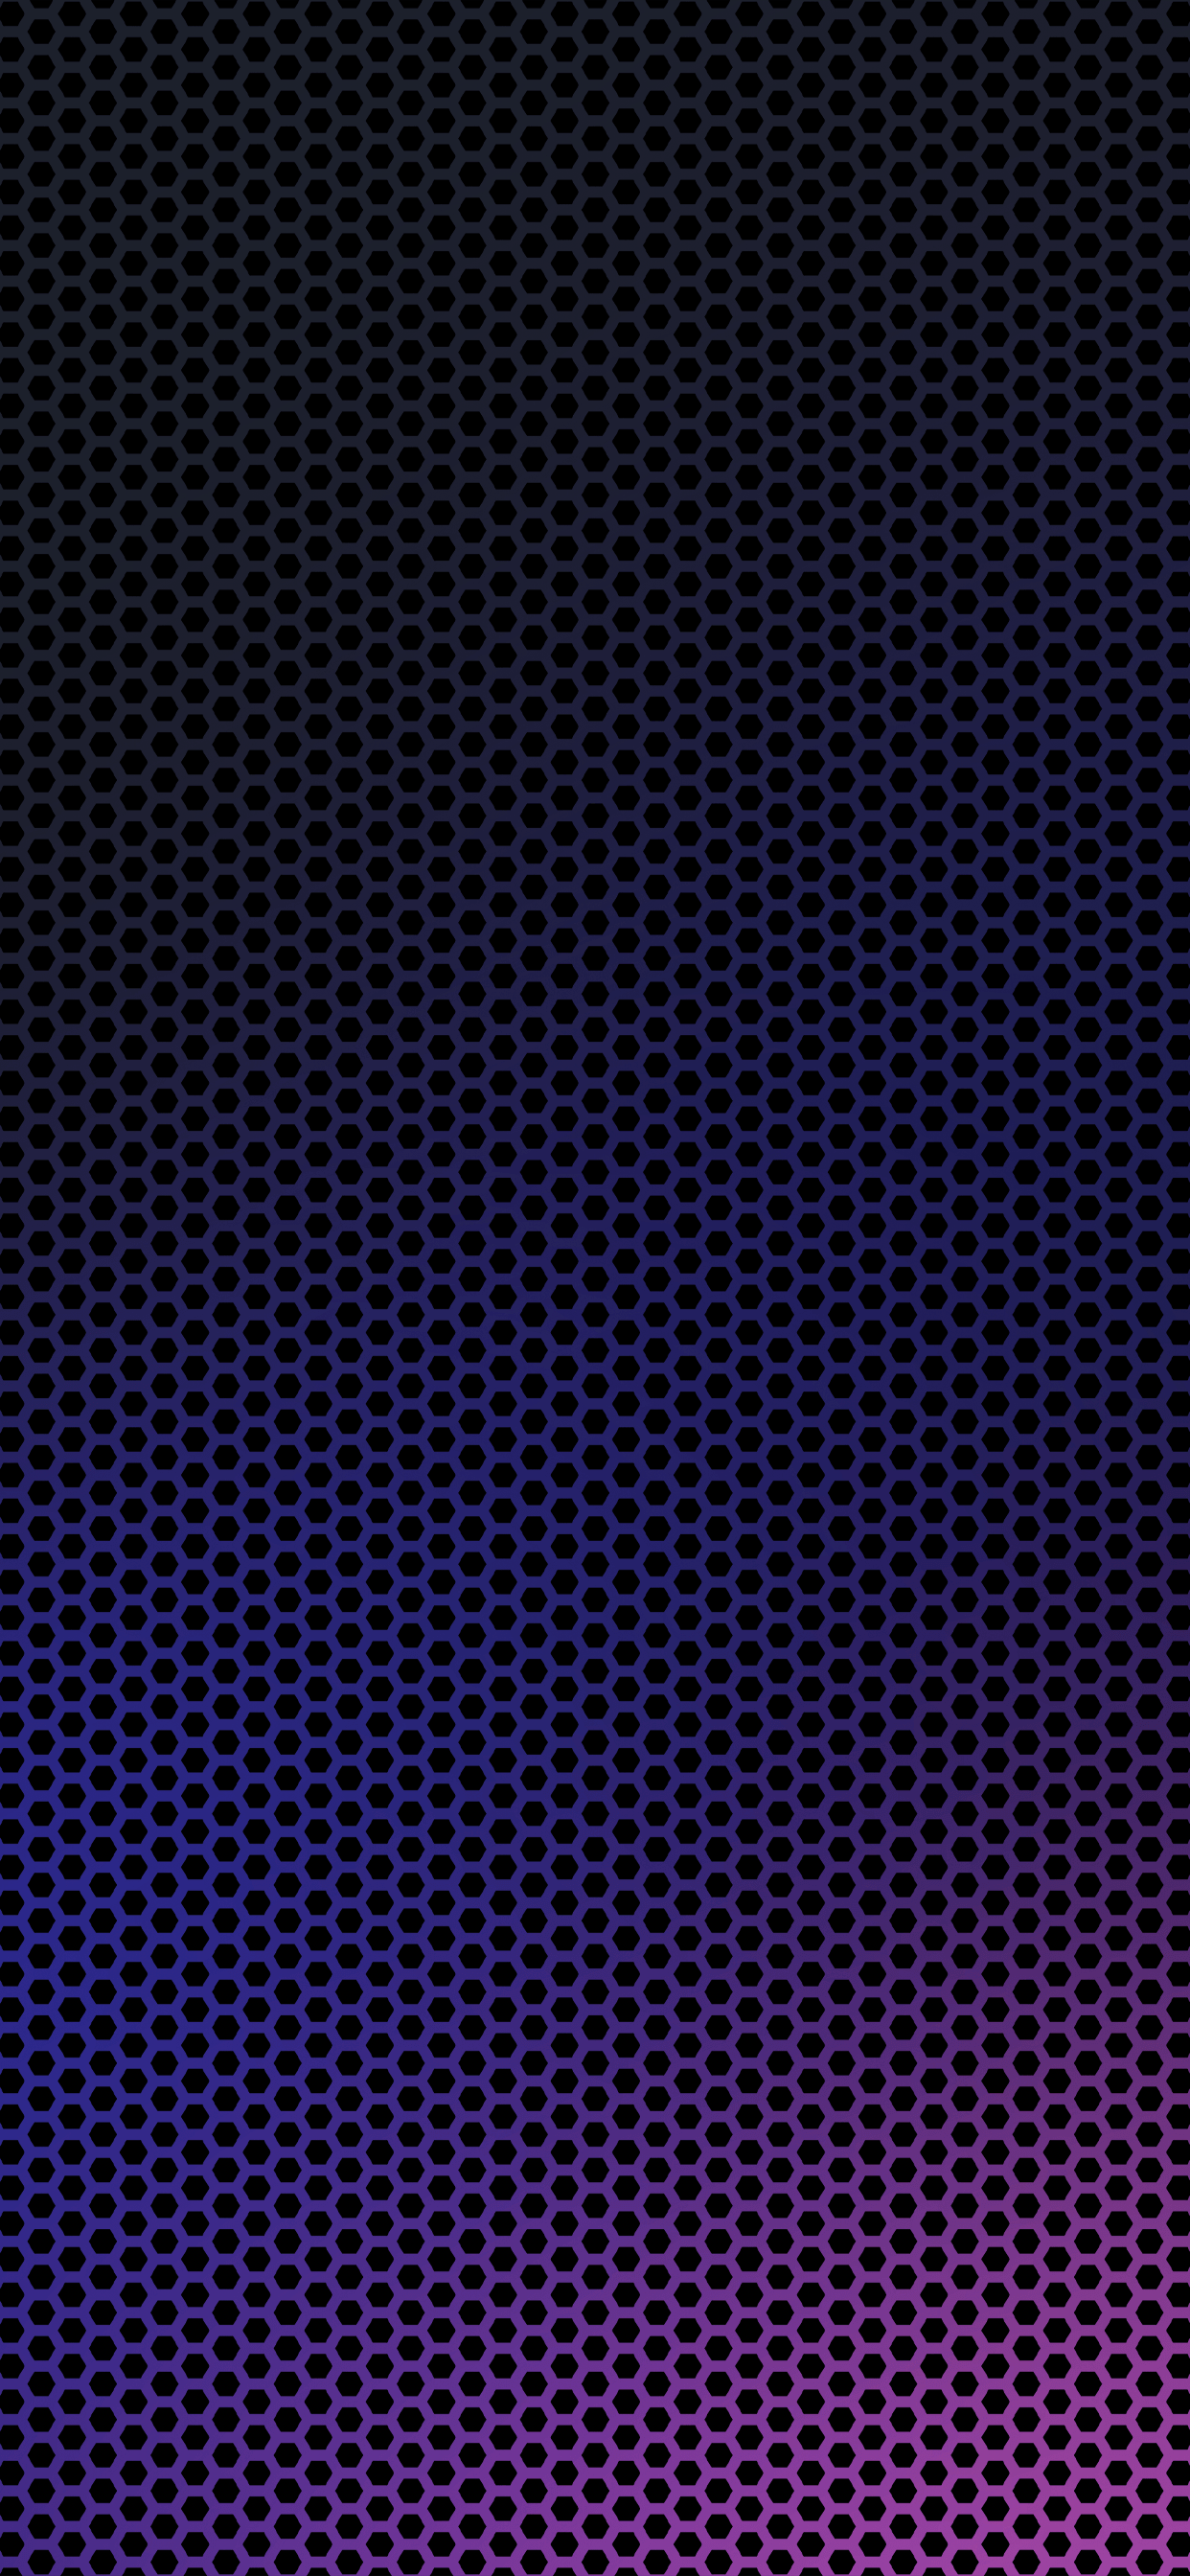 Check out these gridded gradient wallpapers for iPhone